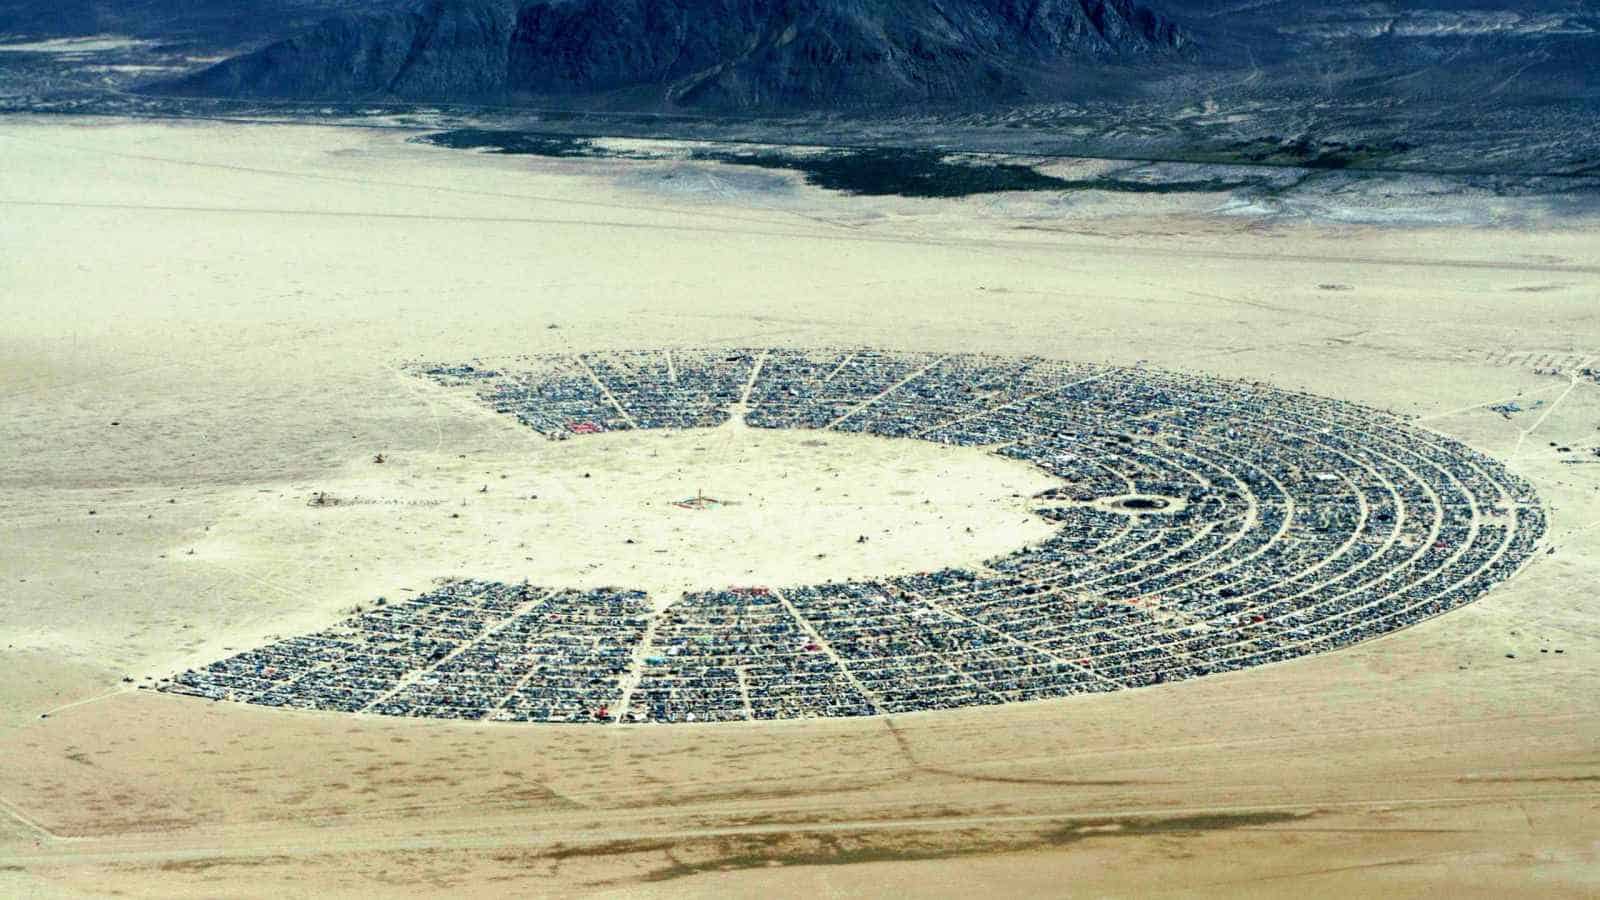 Area15, a new complex displaying Burning Man sculptures